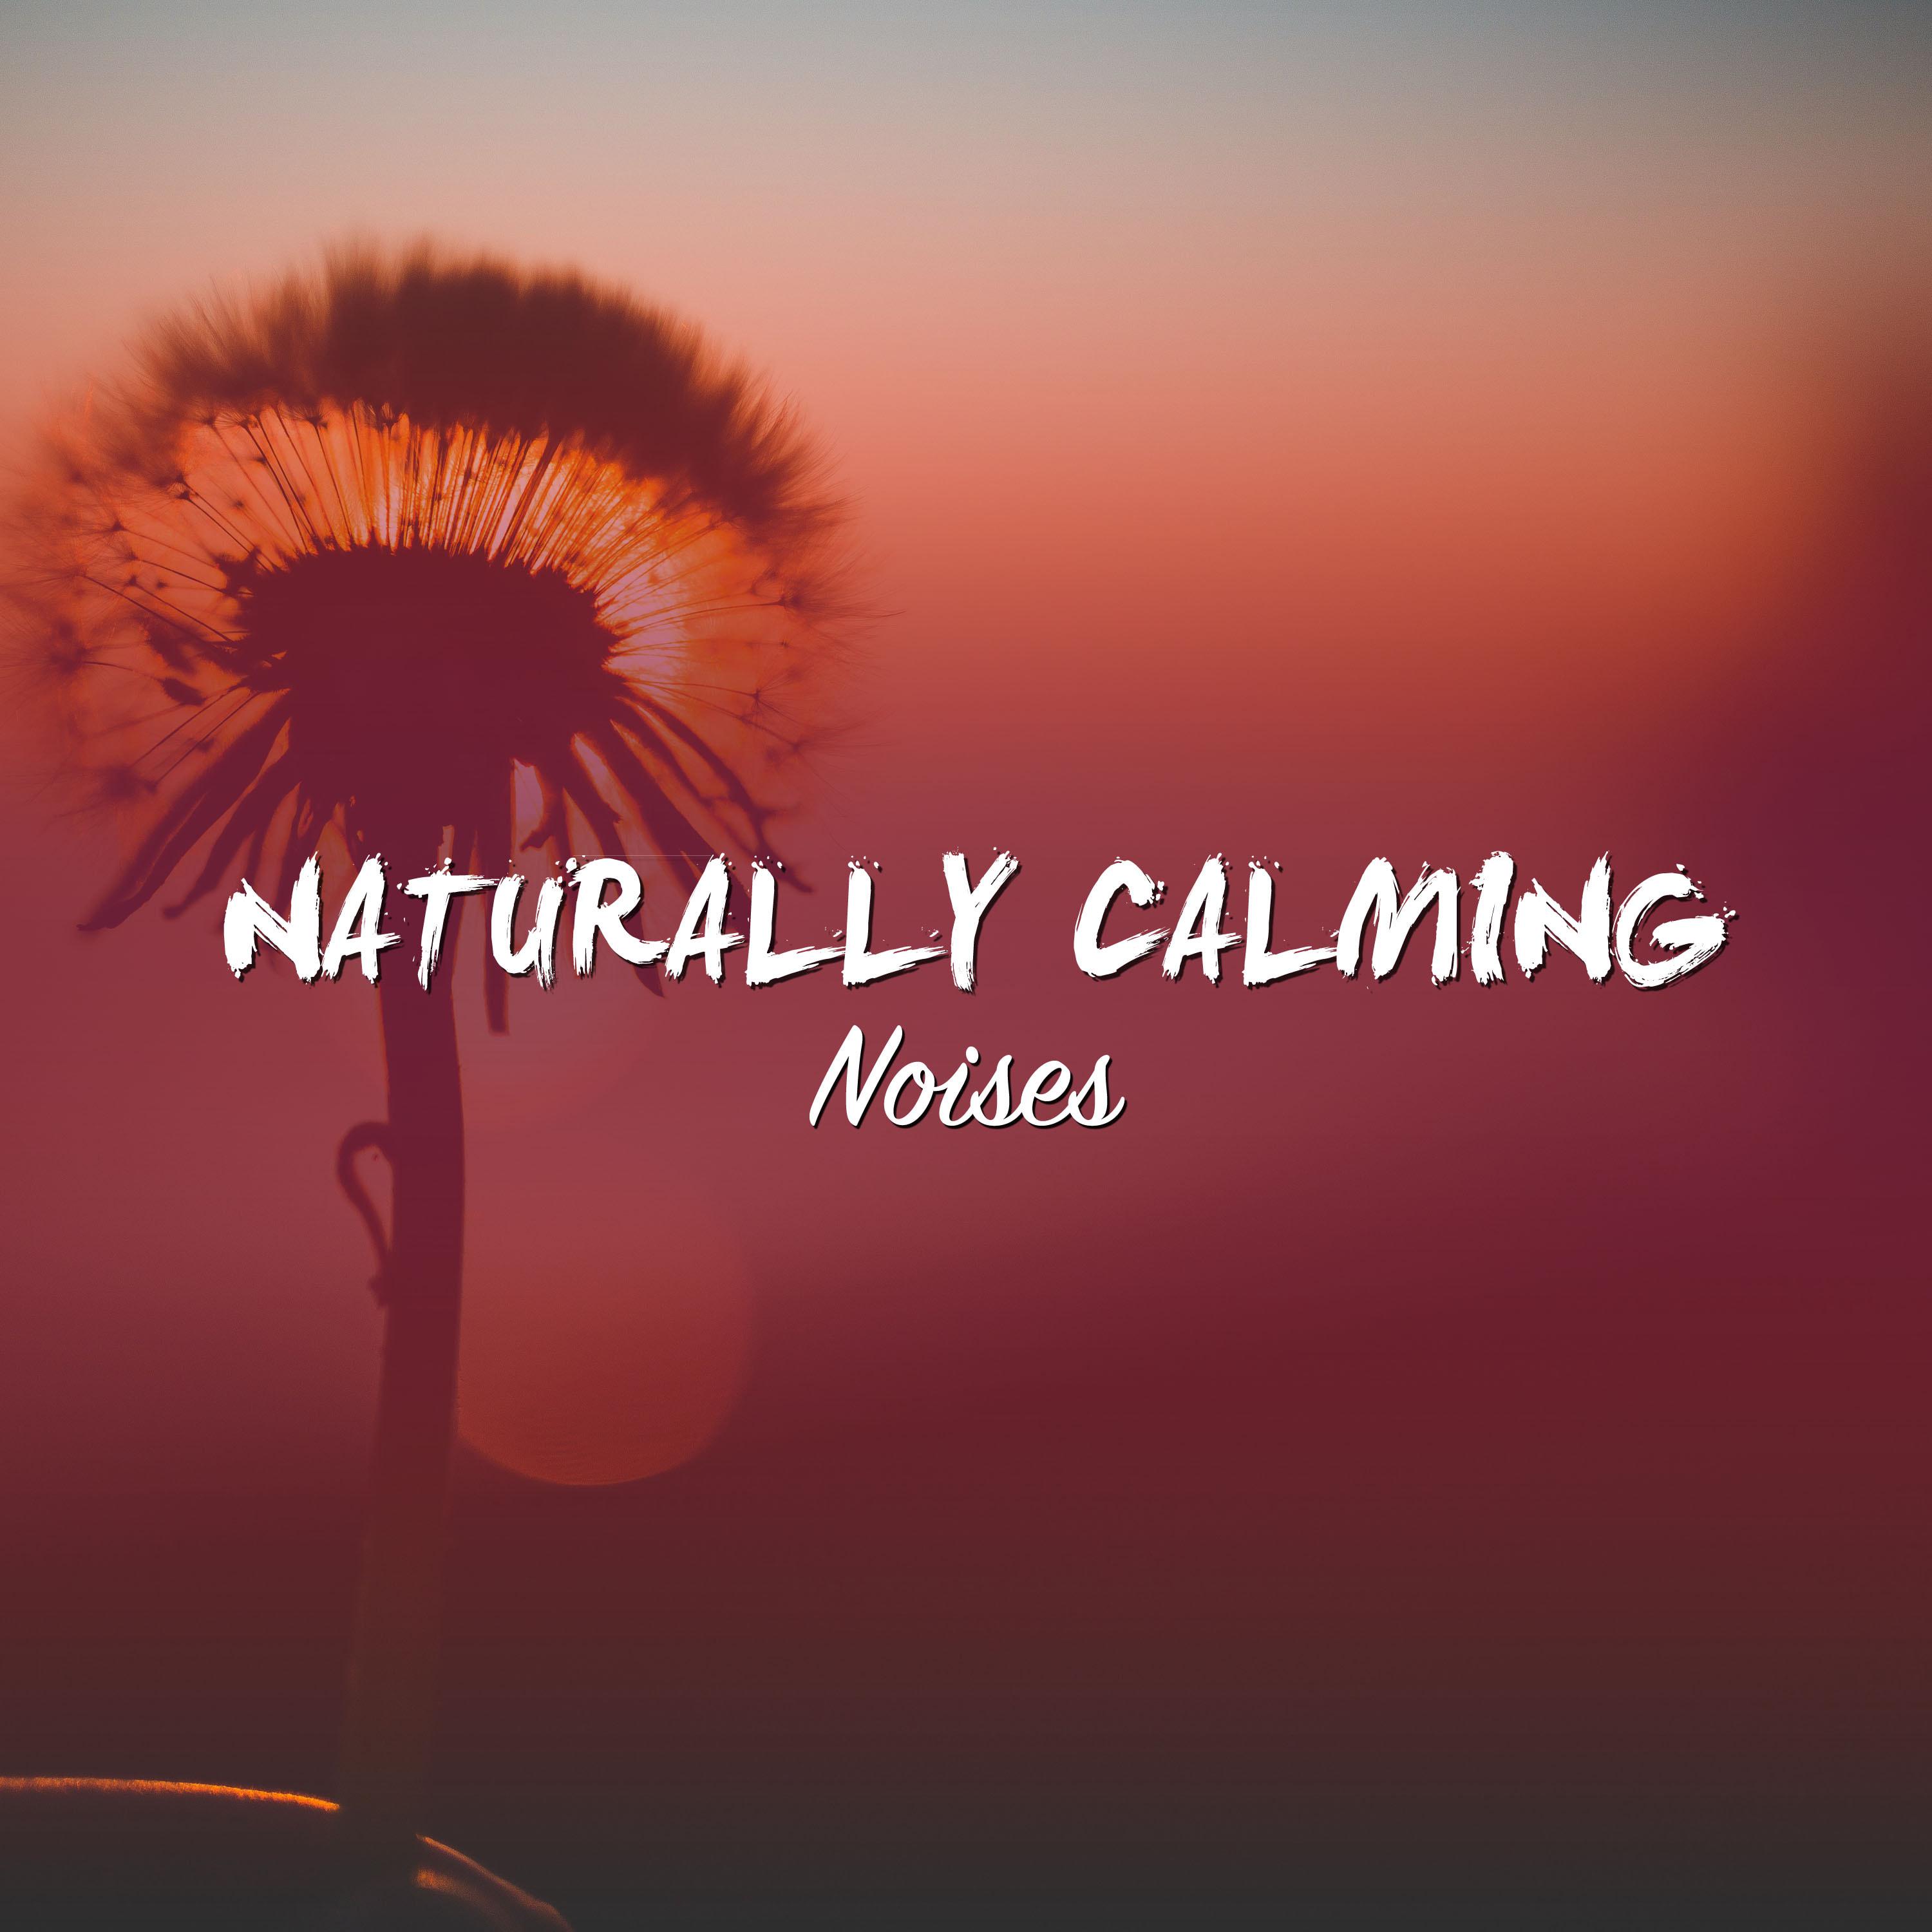 #21 Naturally Calming Noises for Sleep and Relaxation